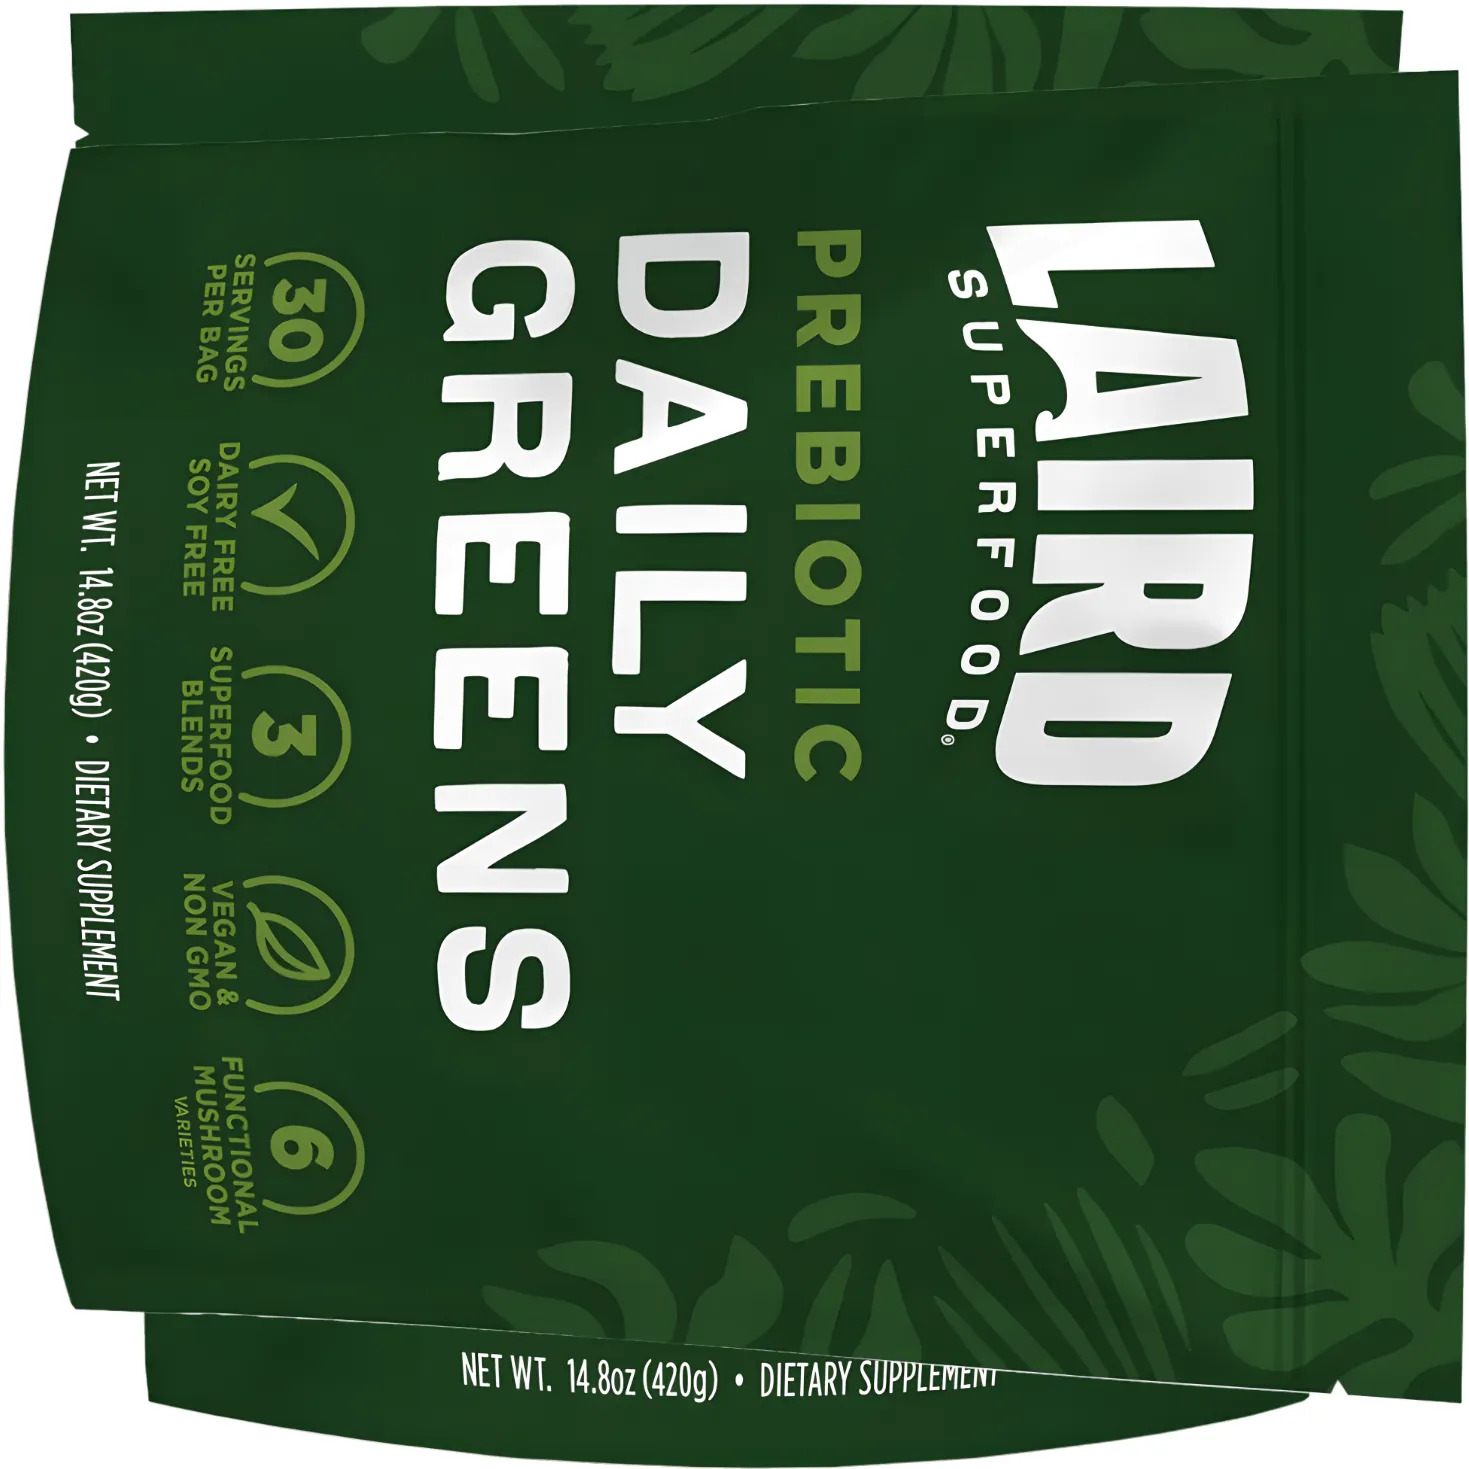 Free Laird Superfood Prebiotic Daily Greens Powder